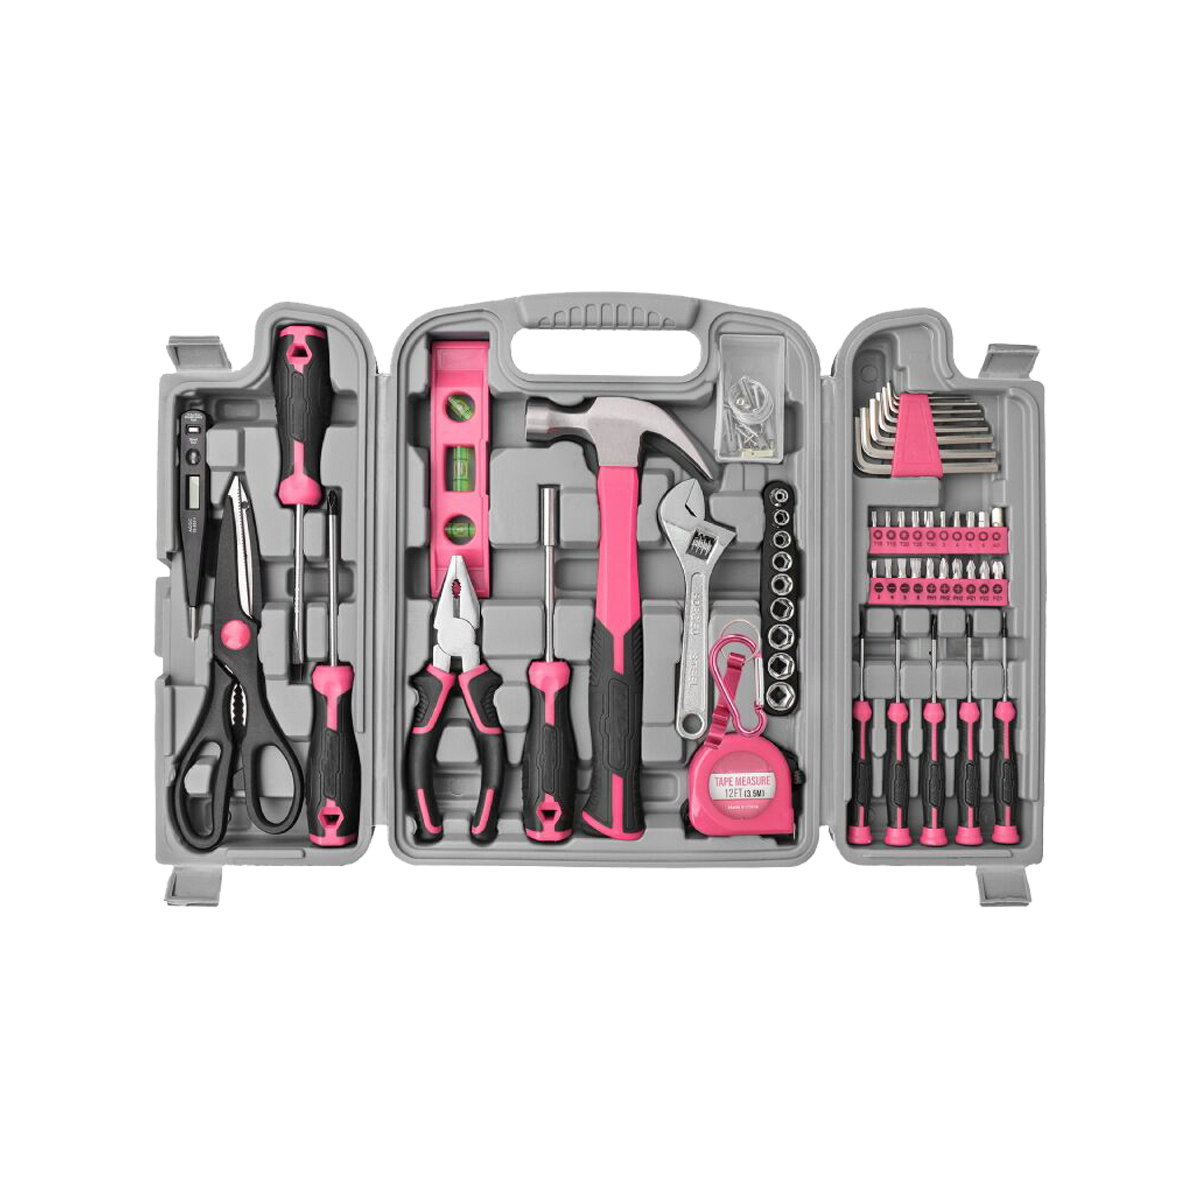 56pcs Pink Home Tool Kit Basic Hand Tools Box Repairs Complete Tool Set for Women. 56pcs Pink Home Tool Kit Basic Hand Tools Box Repairs Complete Tool Set for Women